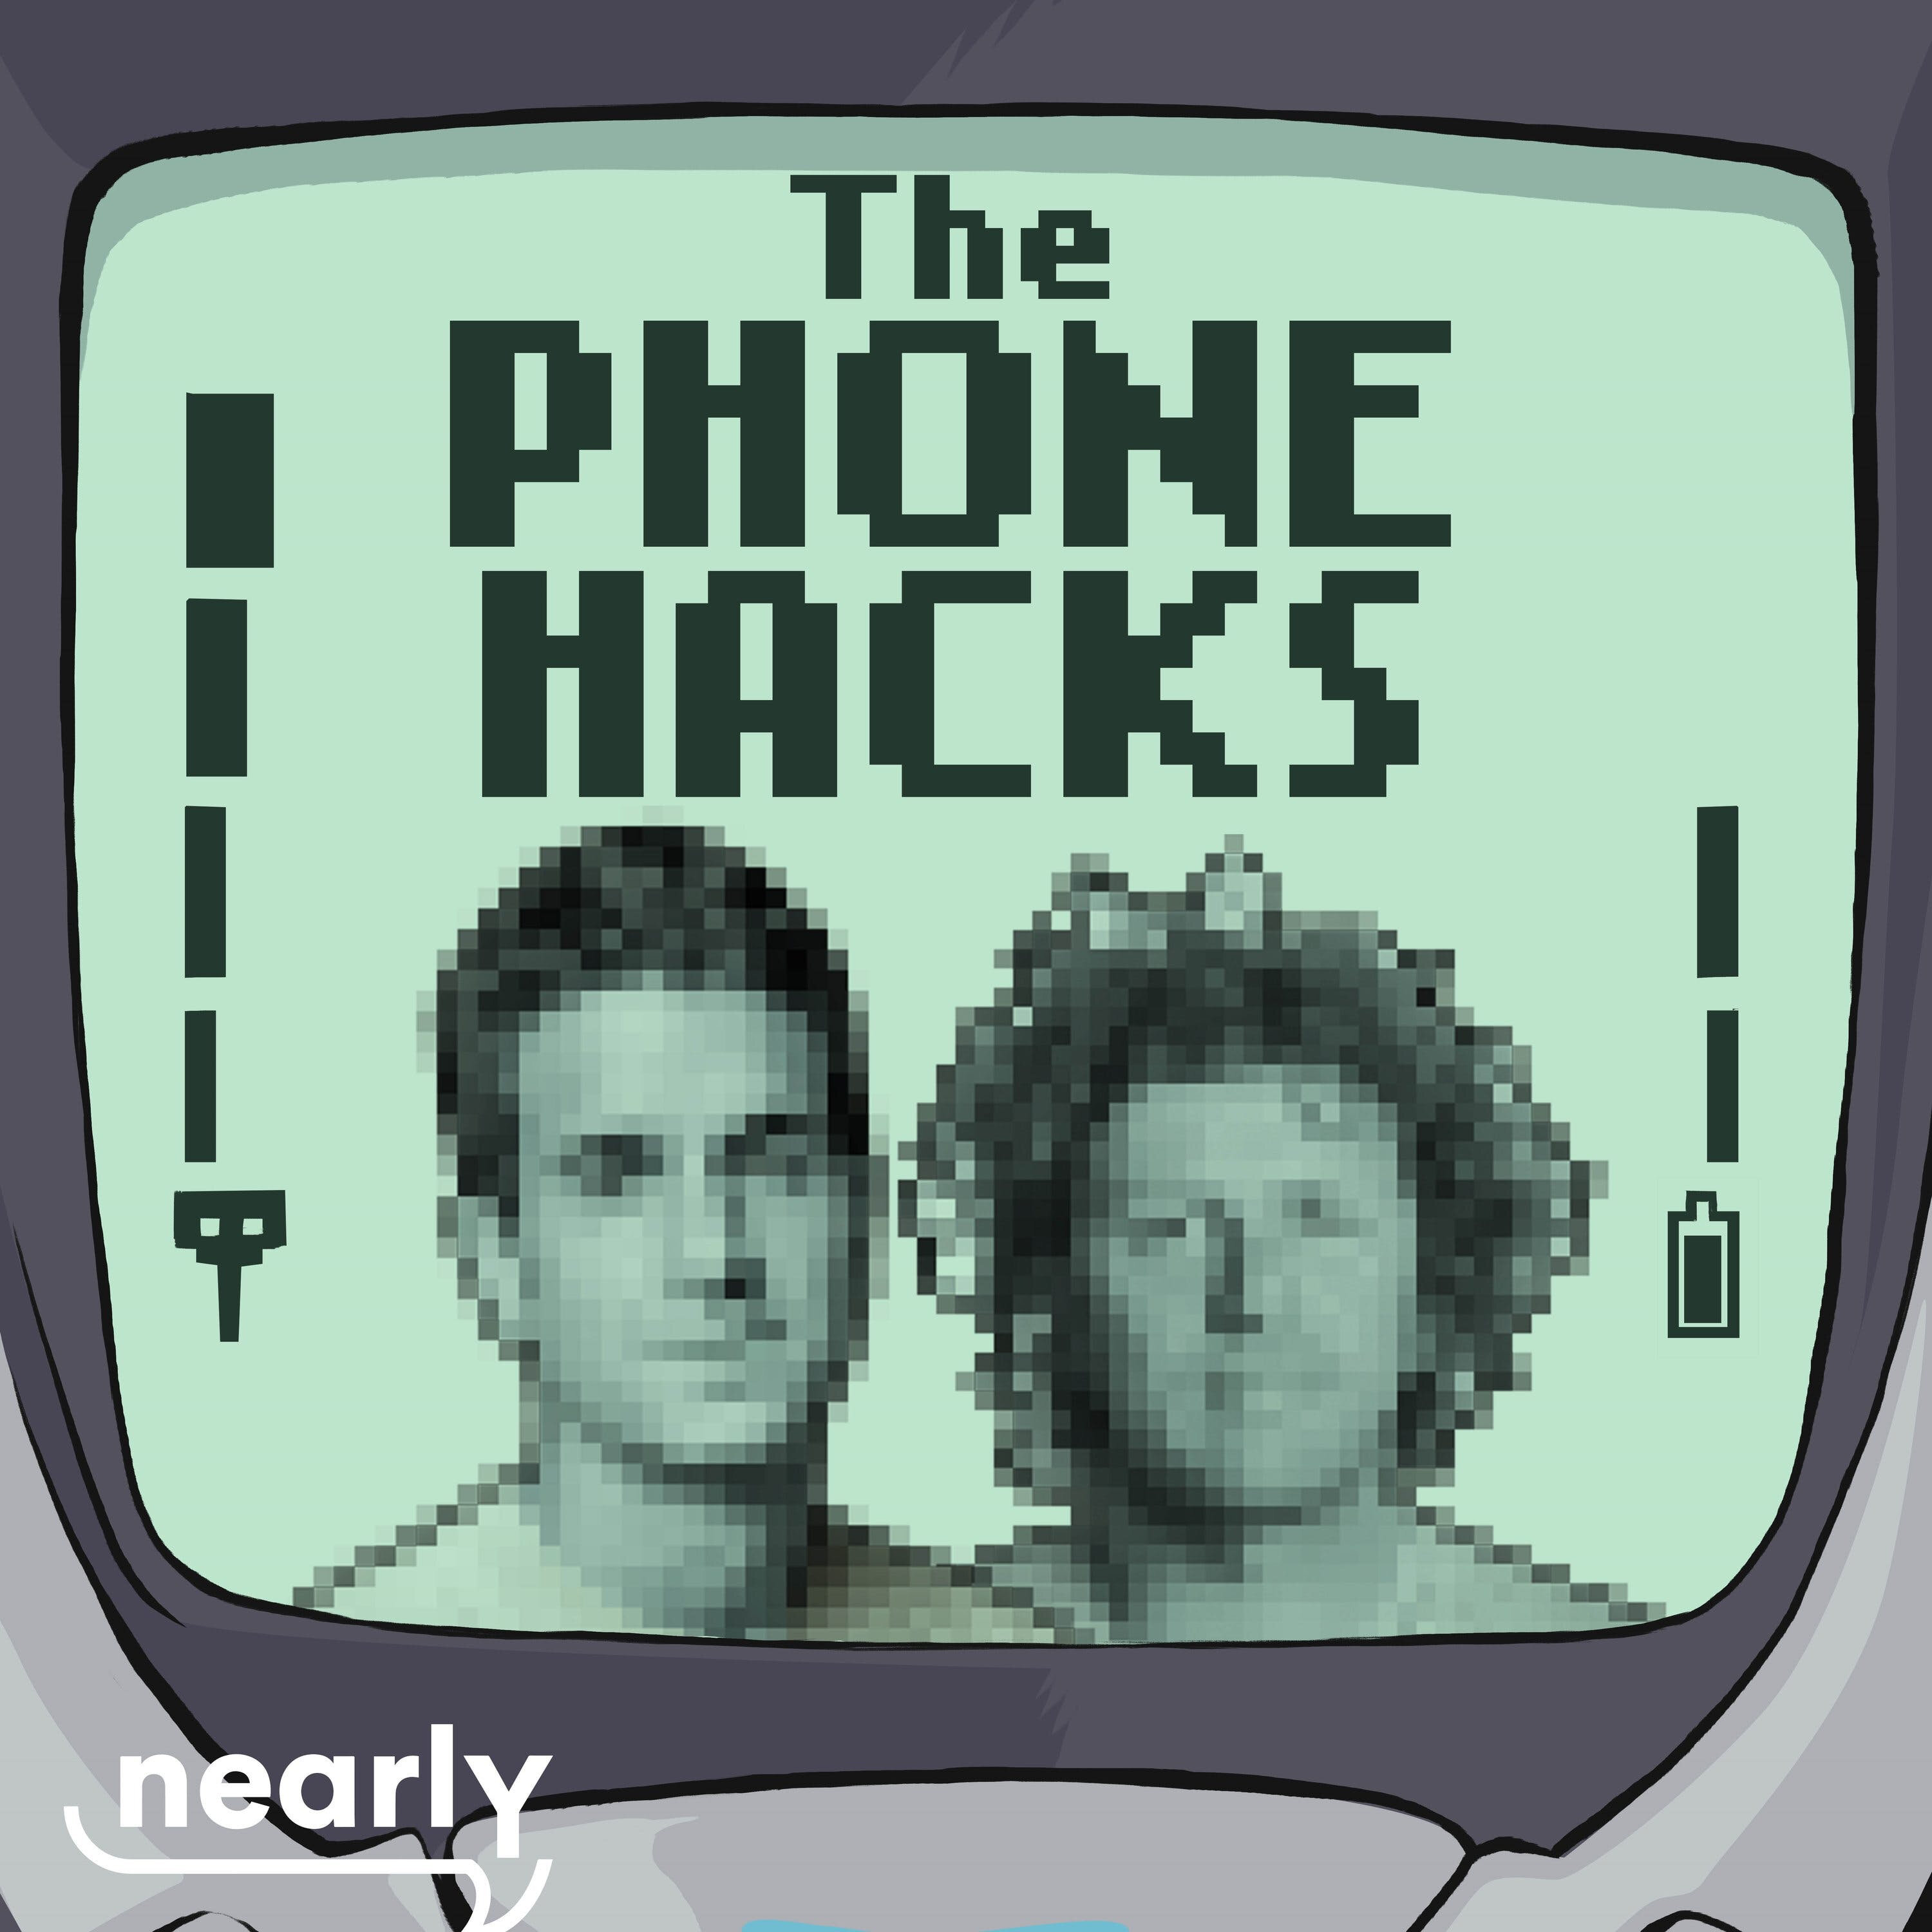 Merry Christmas from The Phone Hacks!